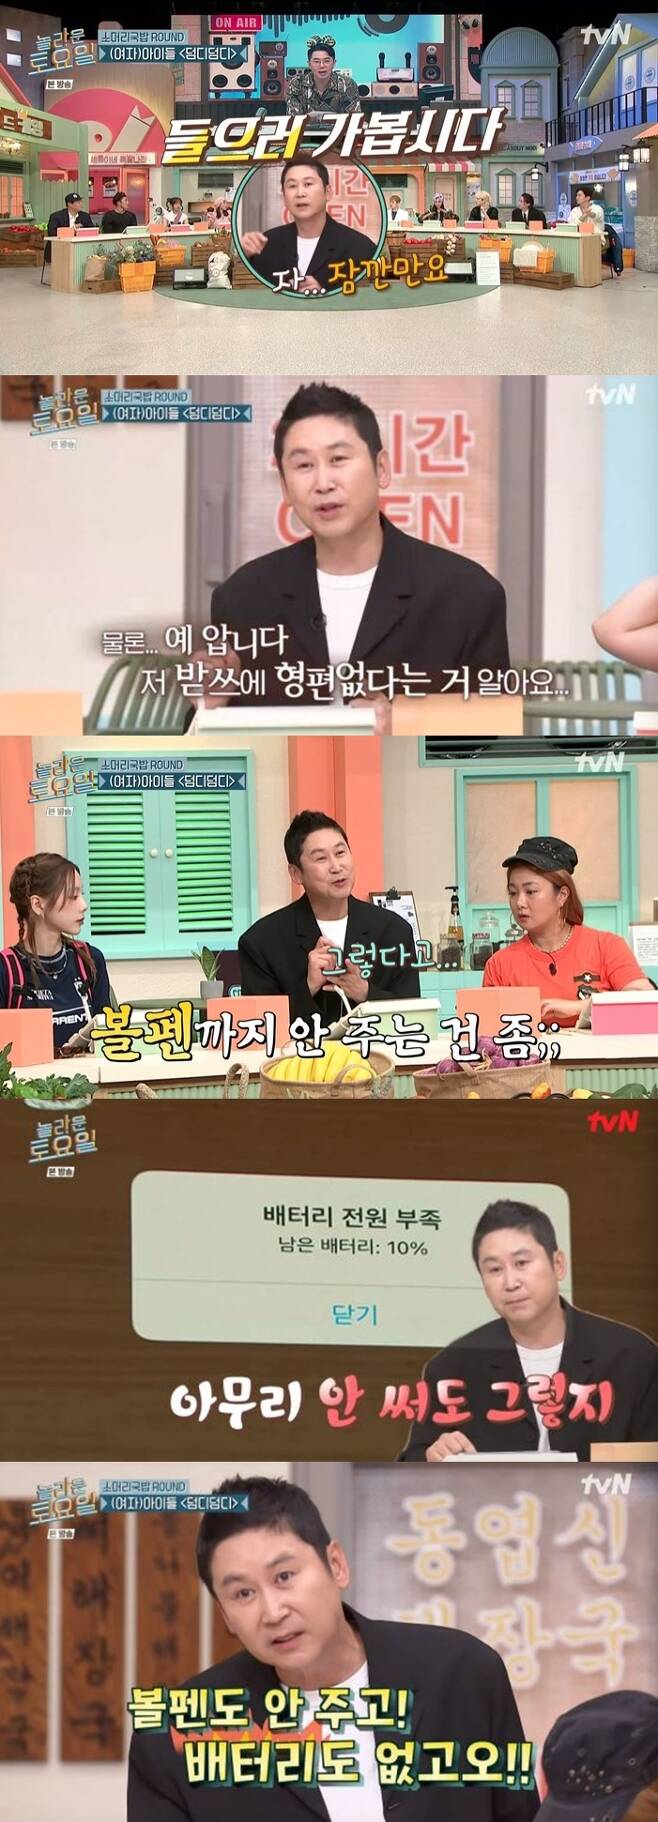 Shin Dong-yup complained to the production team of Amazing SaturdayTVN Amazing Saturday (hereinafter Amazing Saturday), which was broadcast on July 30, was conducted as the first summer special.Singers Zico, BB, comedics Lee Eun-ji and IVE Ahn Yu-jin guest-starred.On this day, the problem of the suzutsu was released by the group (girls) in August 2020, DumdddddddddddddddddddddddddddddddddddddddddddddddddddddddddddddddddddddddddddI listen to it when I shower. Kim Dong-Hyun also said that he had memorized the song.Then Shin Dong-yup looked around hard and suddenly cut off the recording and looked offended. Of course I know.I am bad at the suspense, he said.The members could not bear to laugh.But Shin Dong-yups artistic god didnt stop here: He raised his hand to reveal his support board once again after everything.The released Shin Dong-yups support edition was notified of the lack of battery on the tablet PC.Shin Dong-yup said, No matter how you use it, do you have a ballpoint pen and no battery? He raised his voice and laughed at everyone.